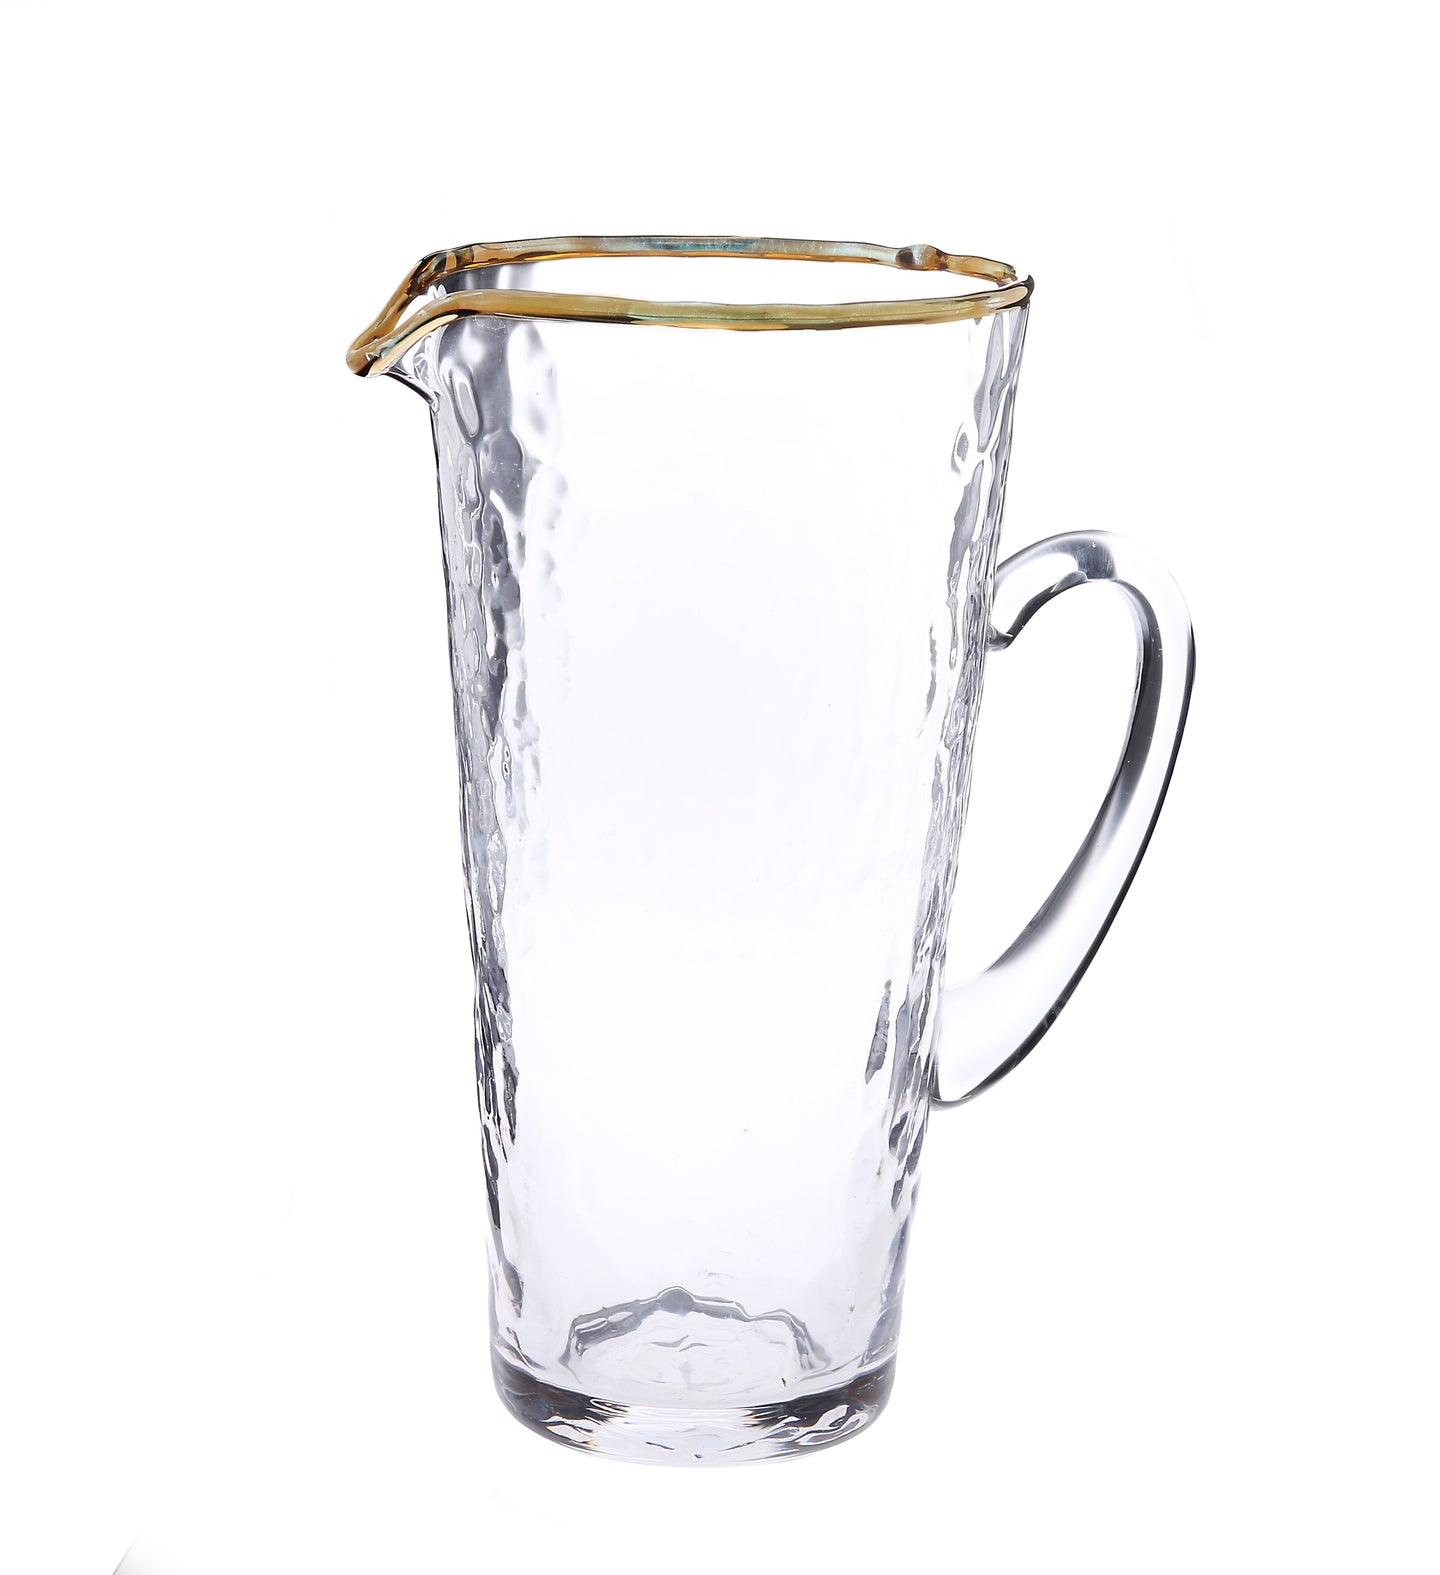 Pebble Glass Pitcher with Gold Rim with Handle